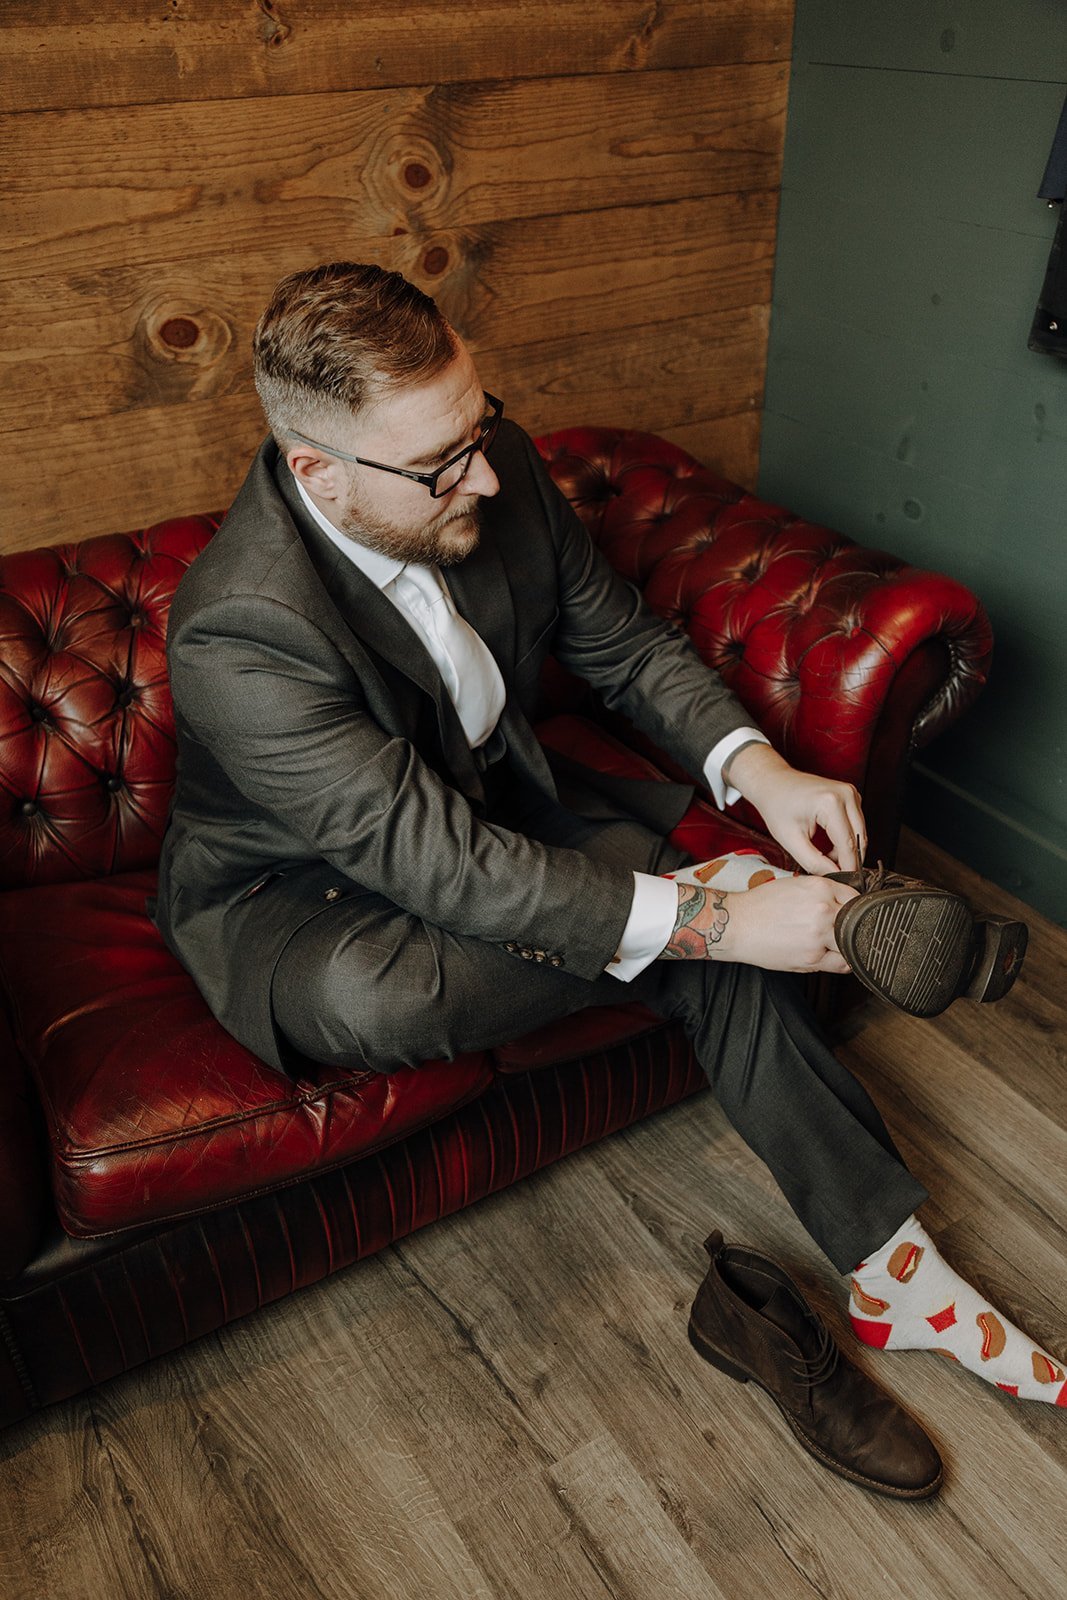 Groom wearing black suit and hamburger socks, sitting on a brown leather couch and tying his shoes